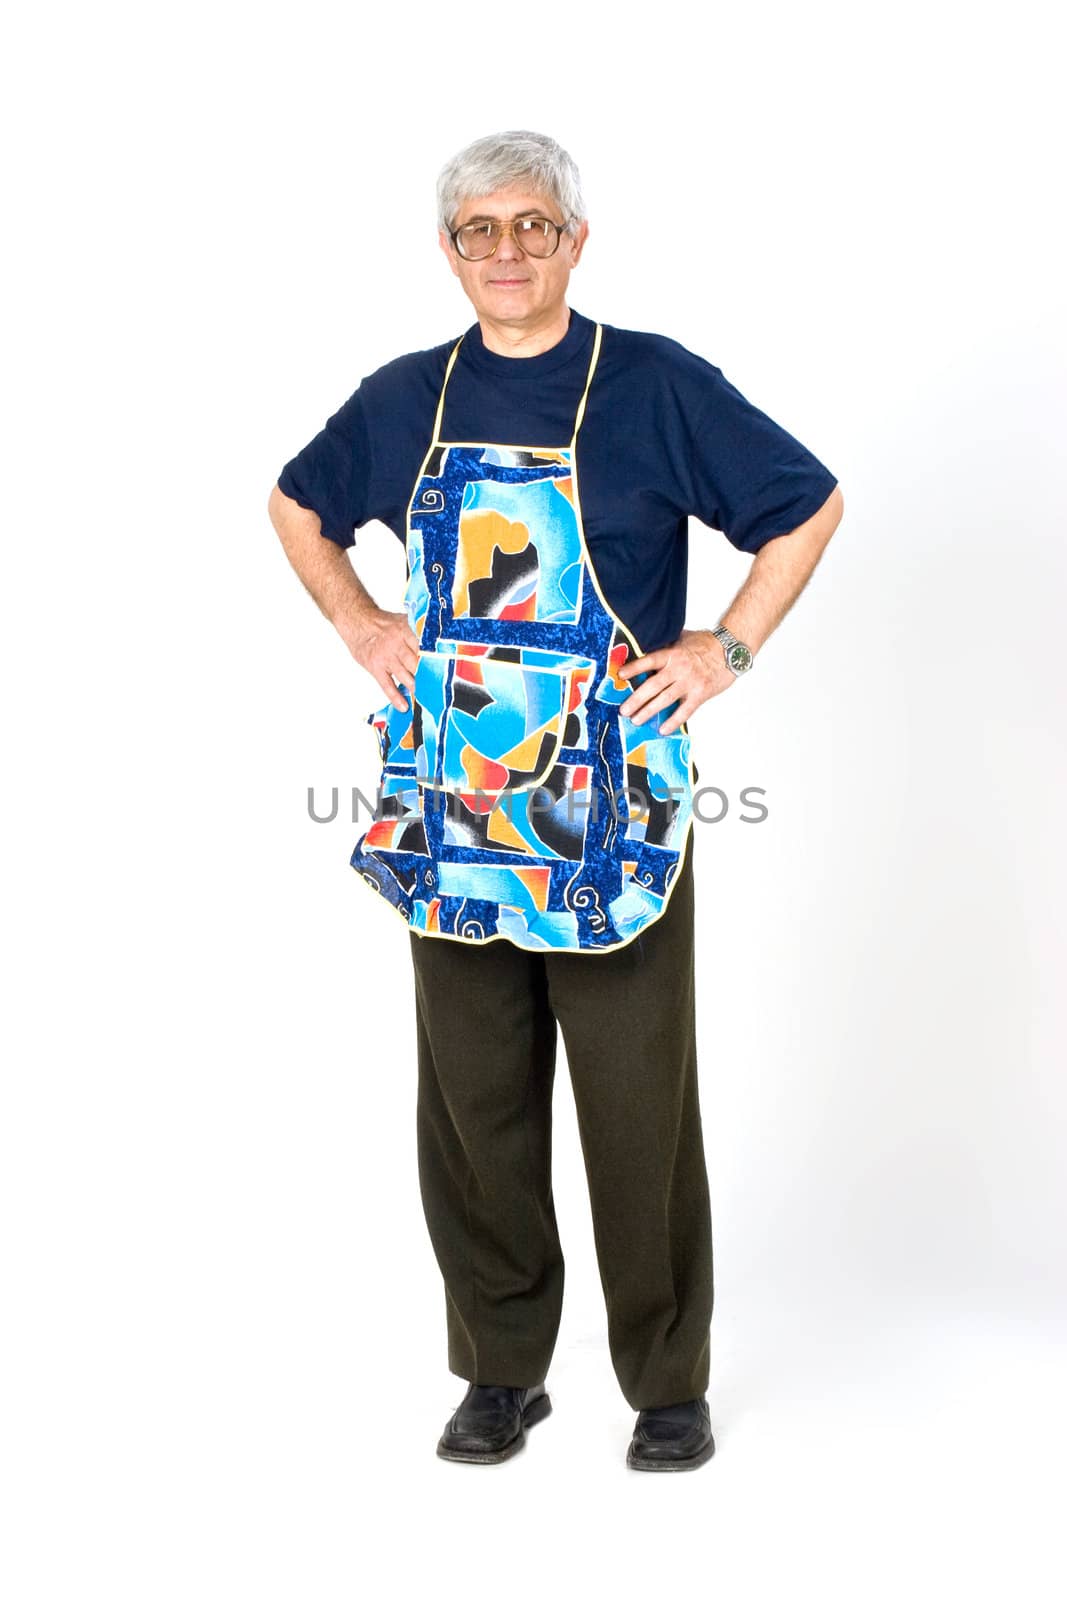 people series: Portarit of aged man in apron